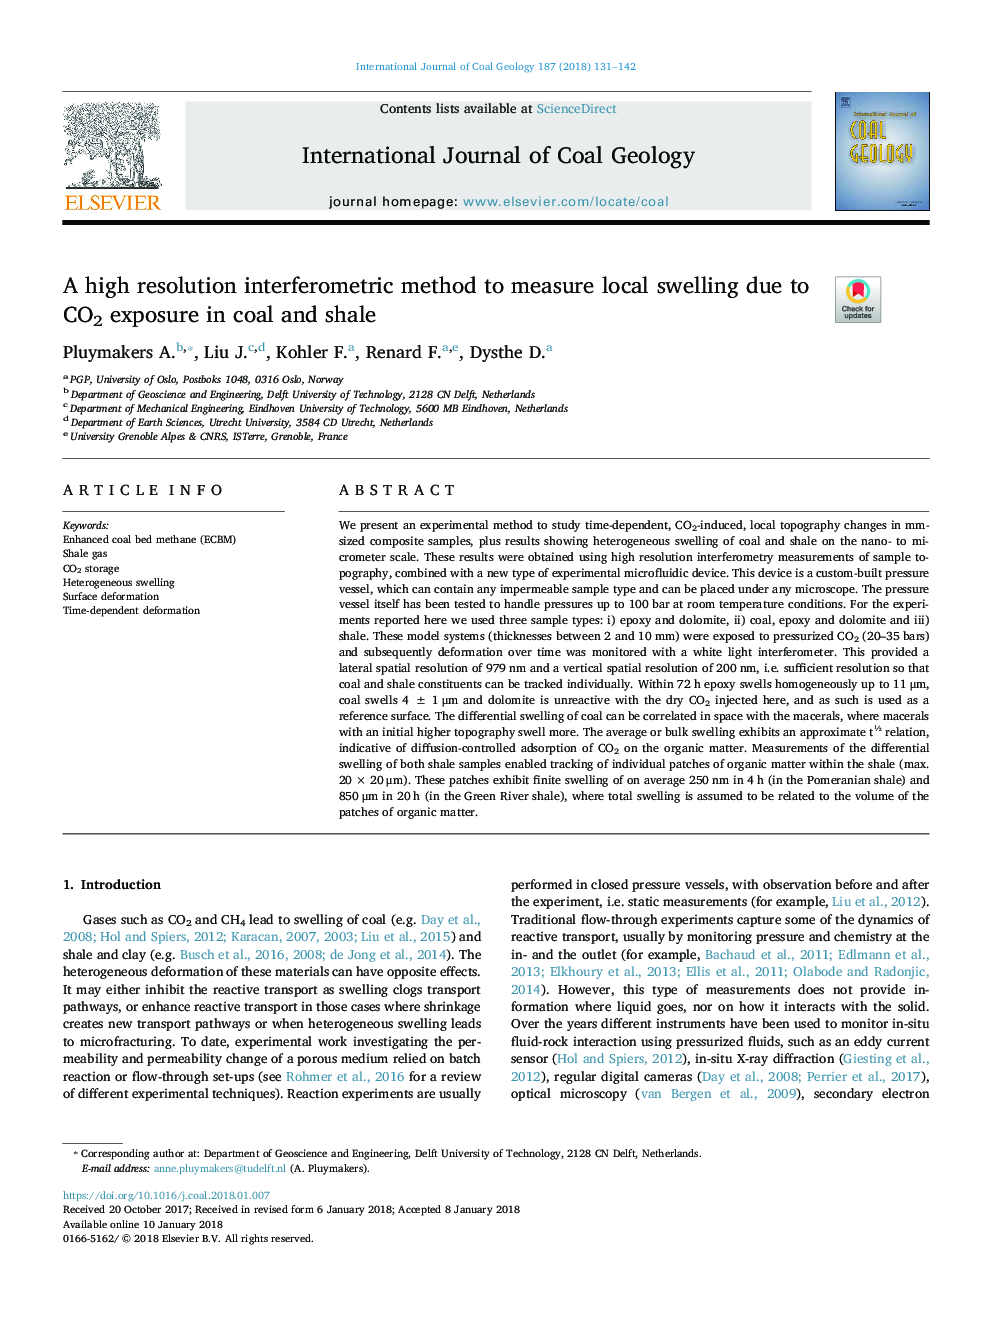 A high resolution interferometric method to measure local swelling due to CO2 exposure in coal and shale